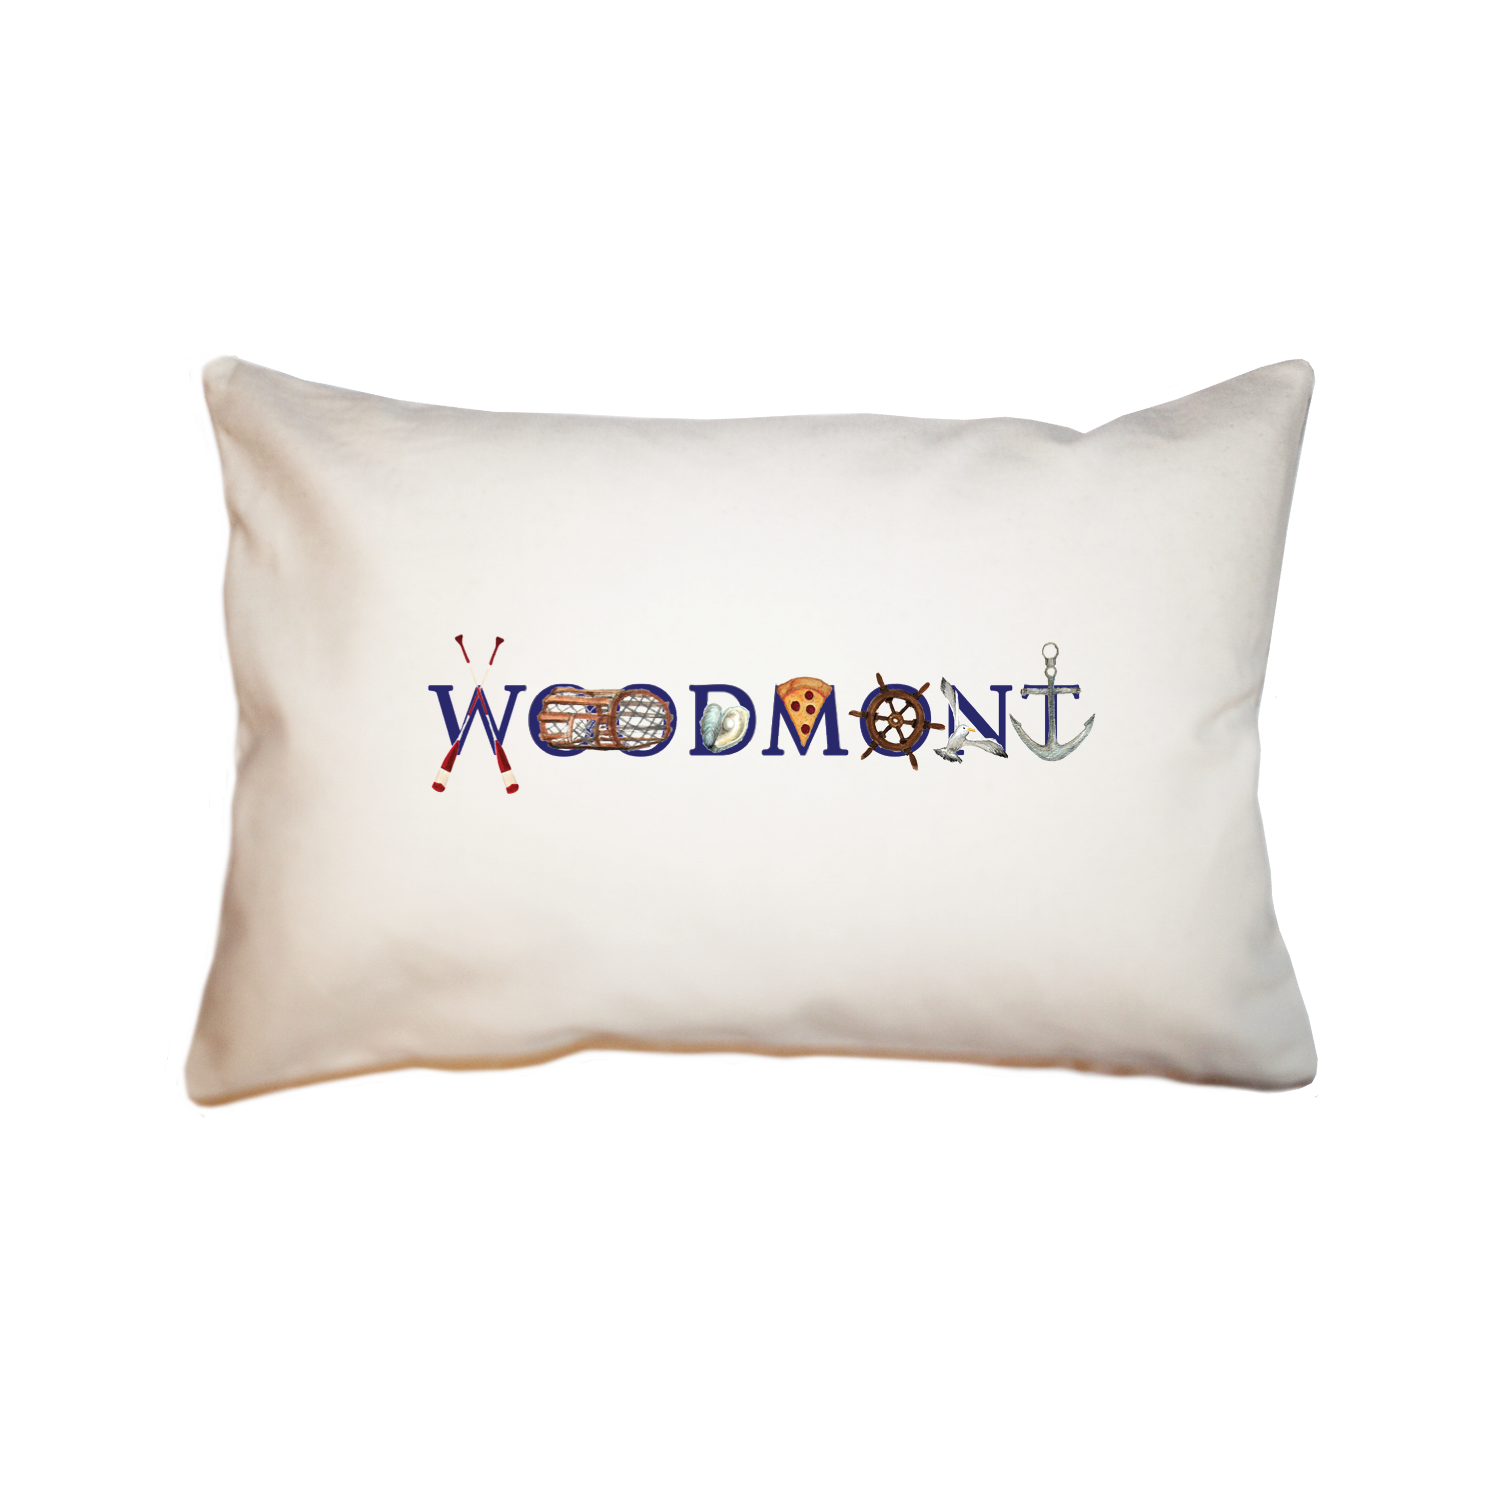 woodmont large rectangle pillow